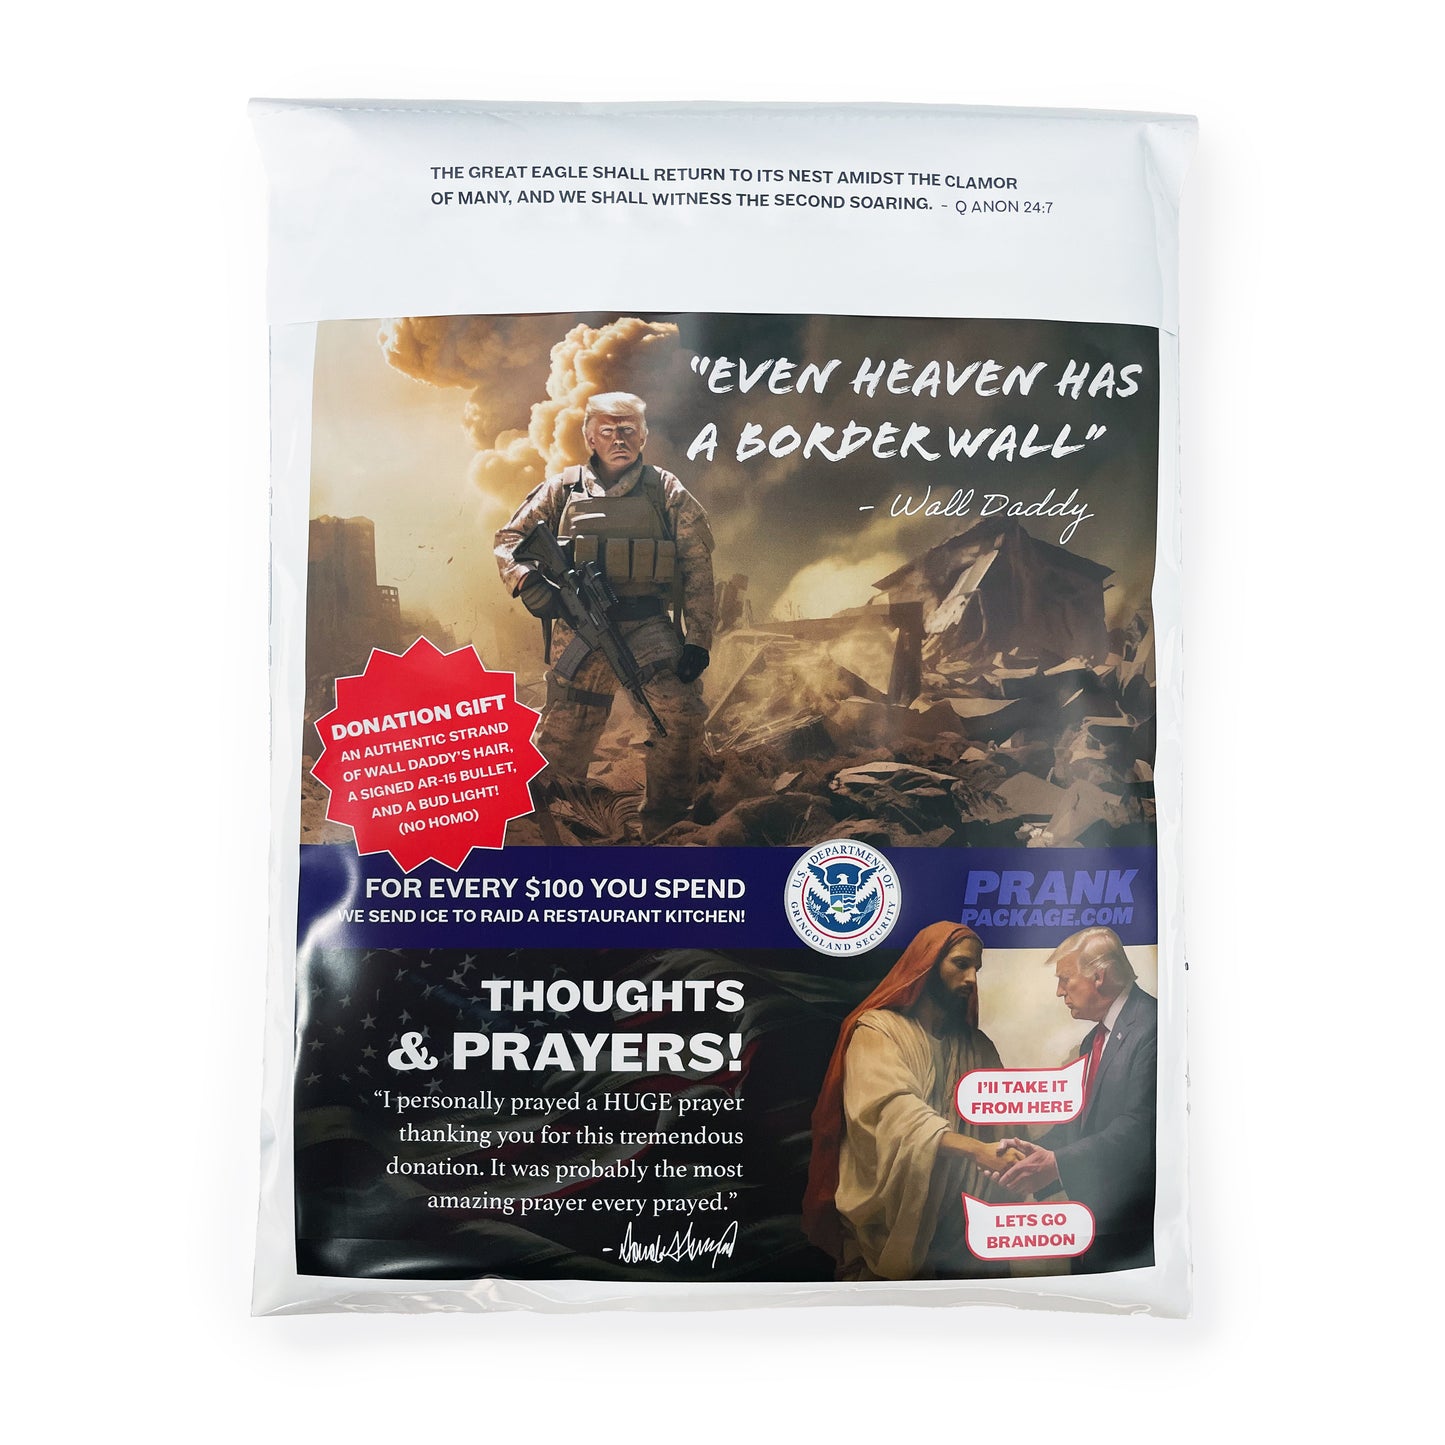 Back side of Trump prank package features an image of Trump in a military outfit, standing in a bombed desert city, with an AR-15 and text that says, "EVEN HEAVEN HAS A BOARDER WALL - Wall Daddy". It also features a picture of Jesus shaking Trump's hand with a speech bubble that says, "I'll take it from here" to Jesus. Lots of other funny text included.